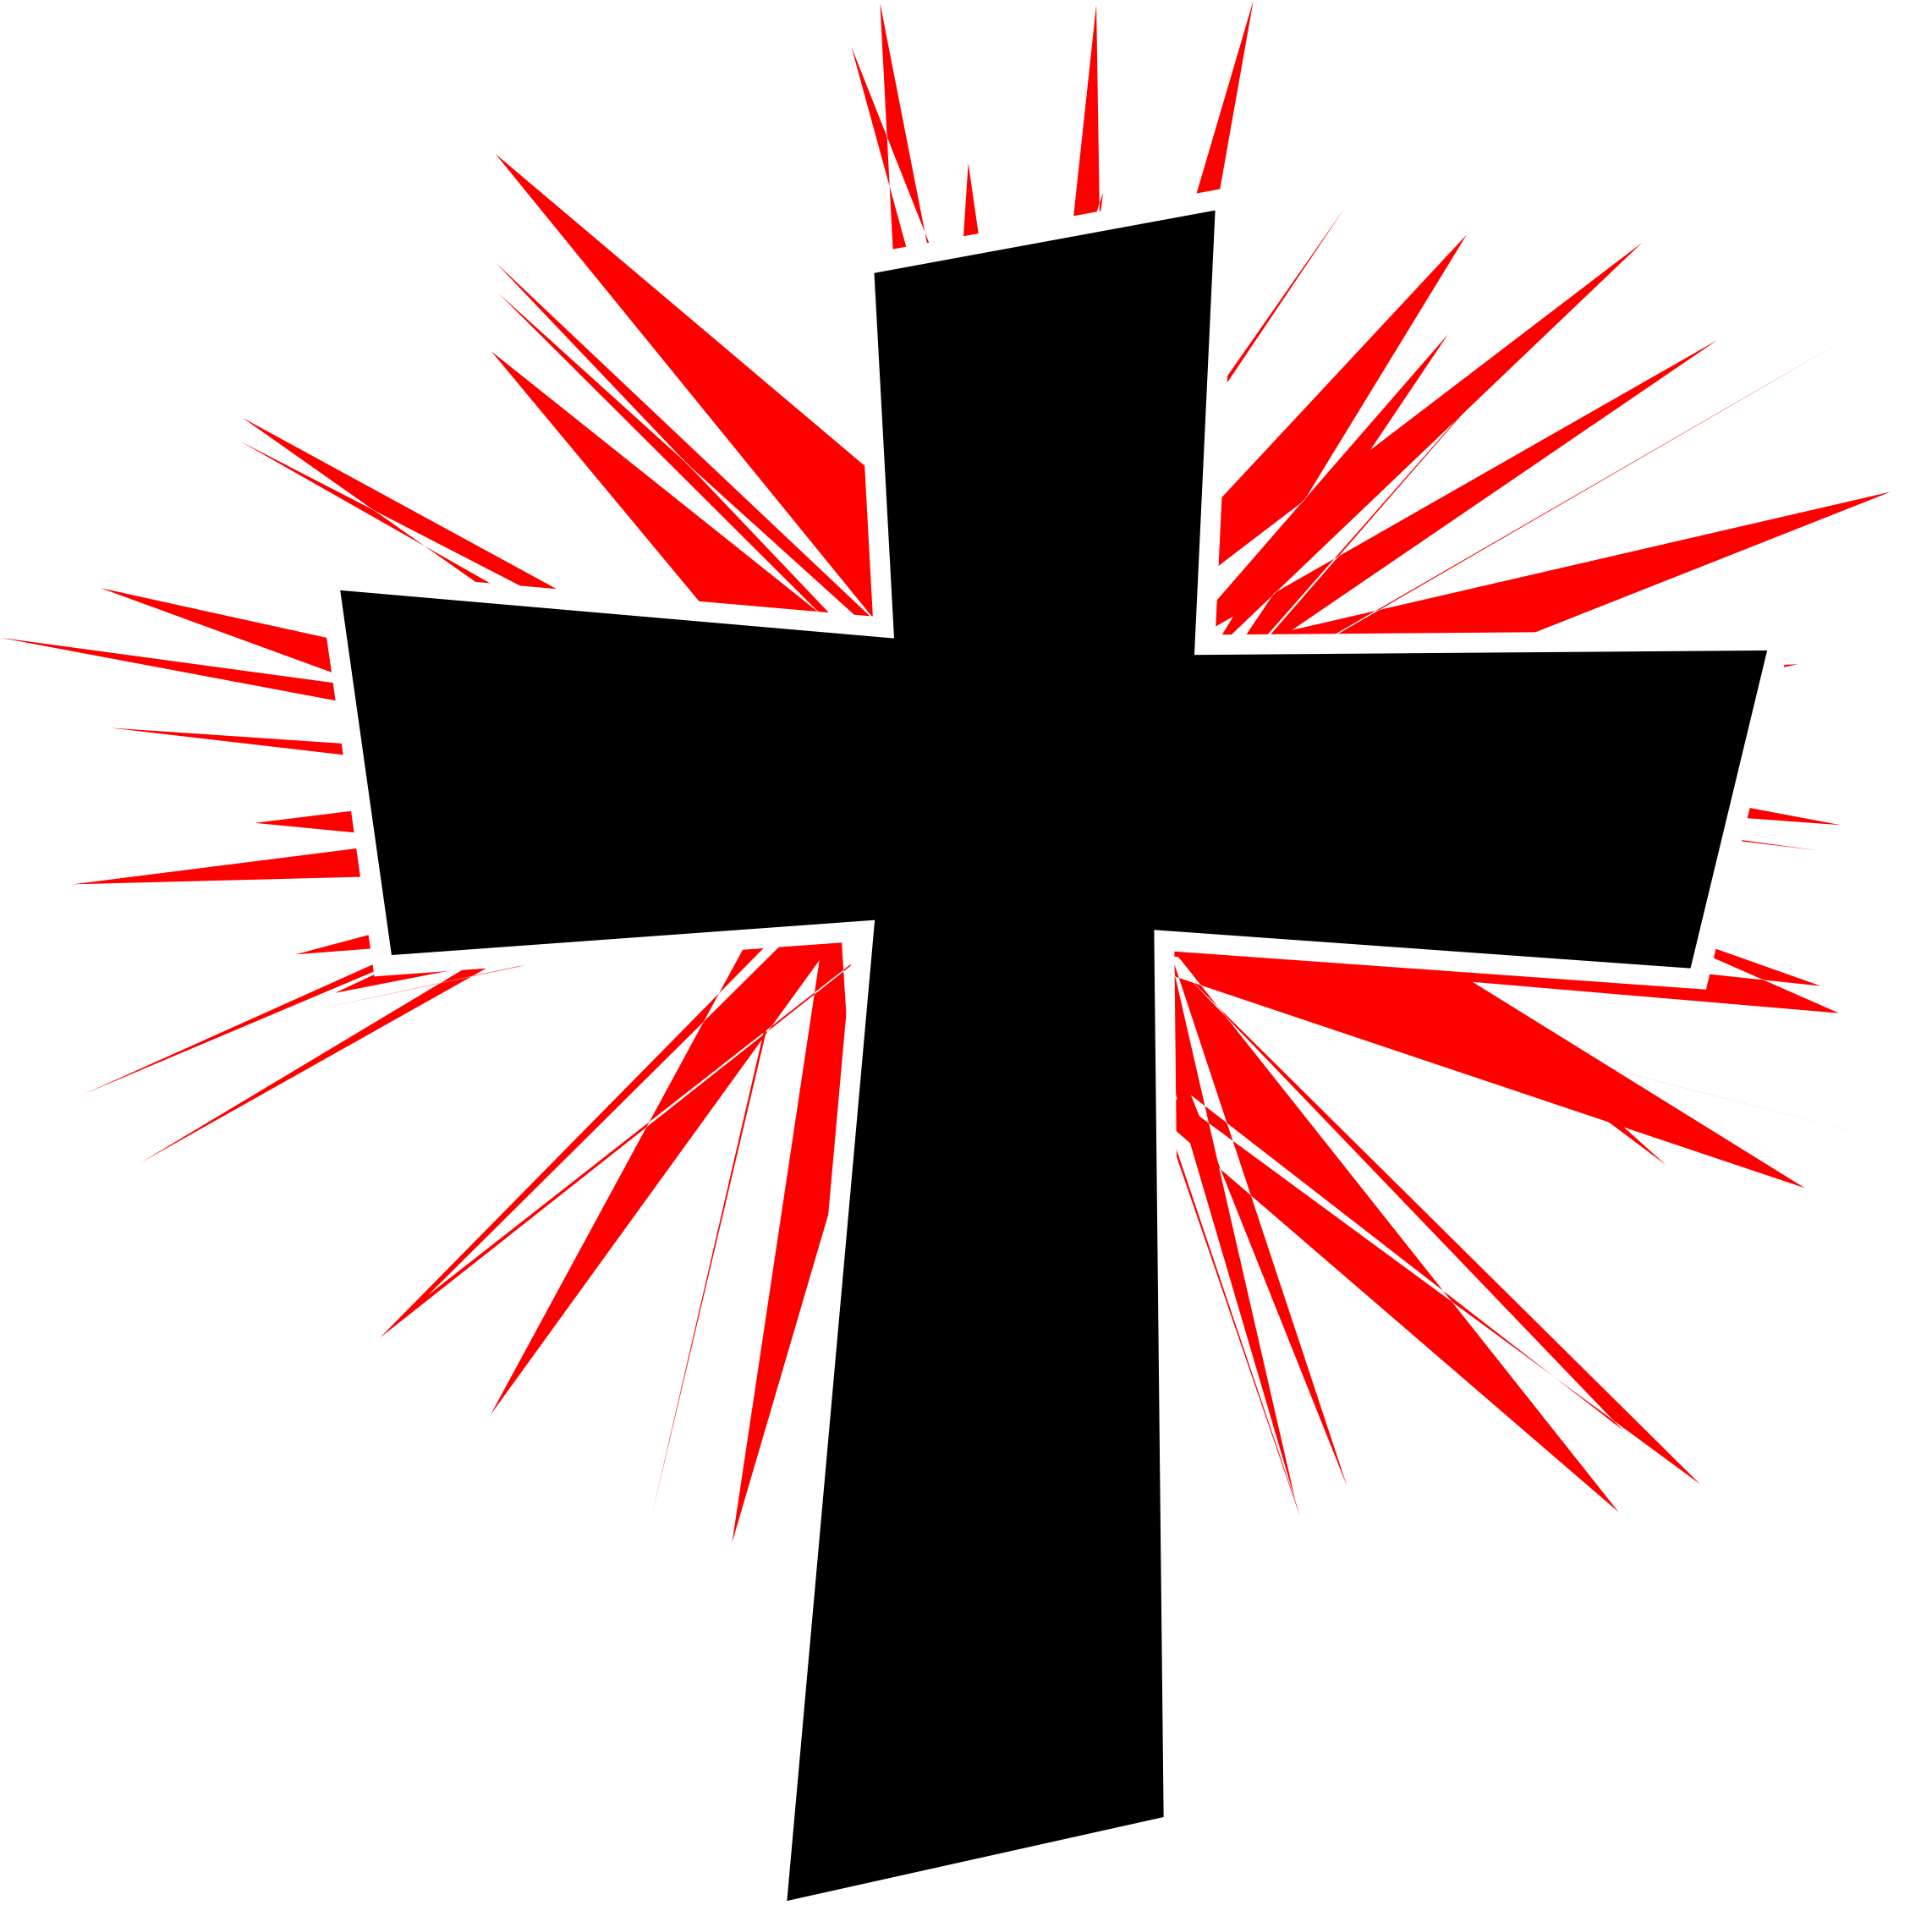 A Black Cross With Red Rays